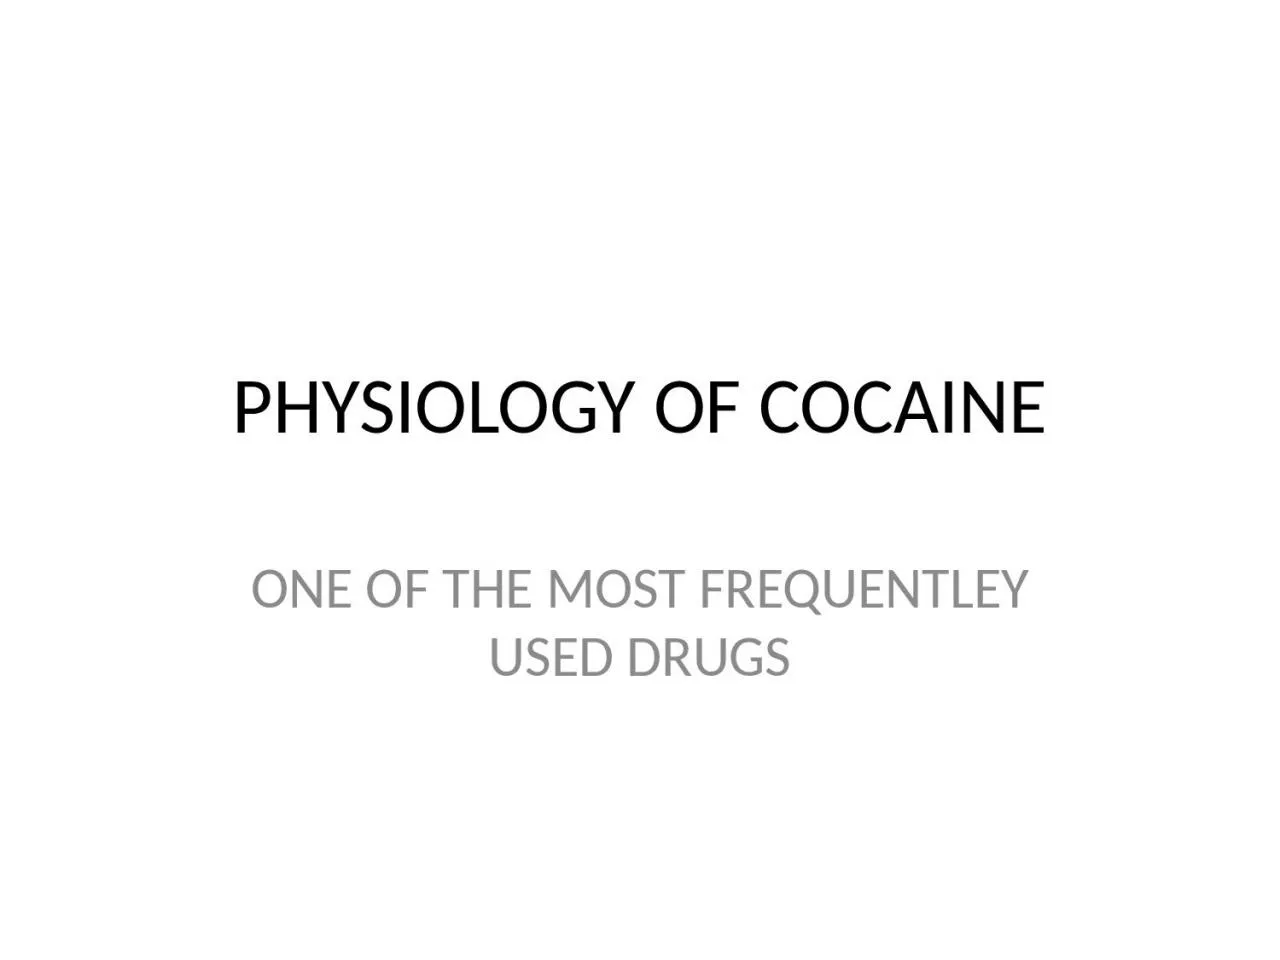 PHYSIOLOGY OF COCAINE ONE OF THE MOST FREQUENTLEY USED DRUGS